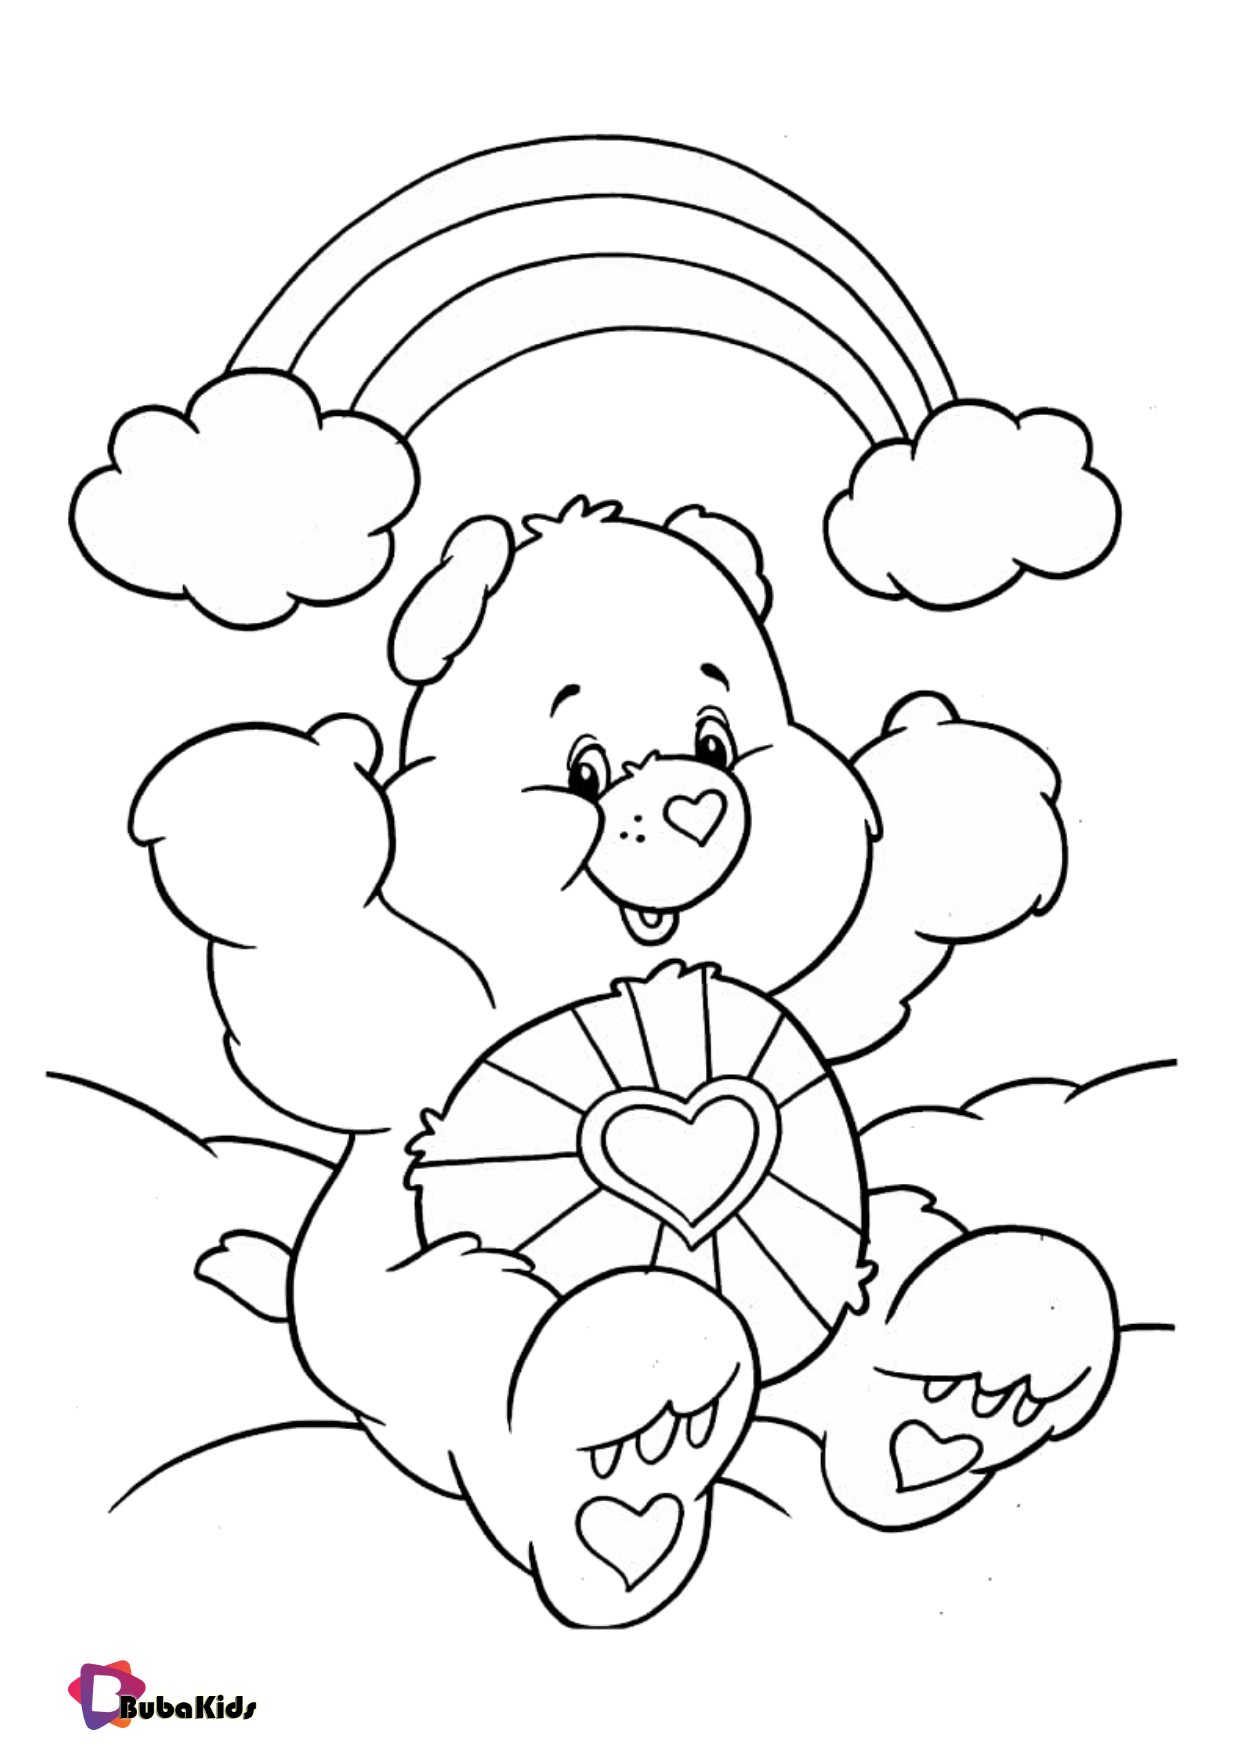 Cute bear and rainbow coloring page Wallpaper